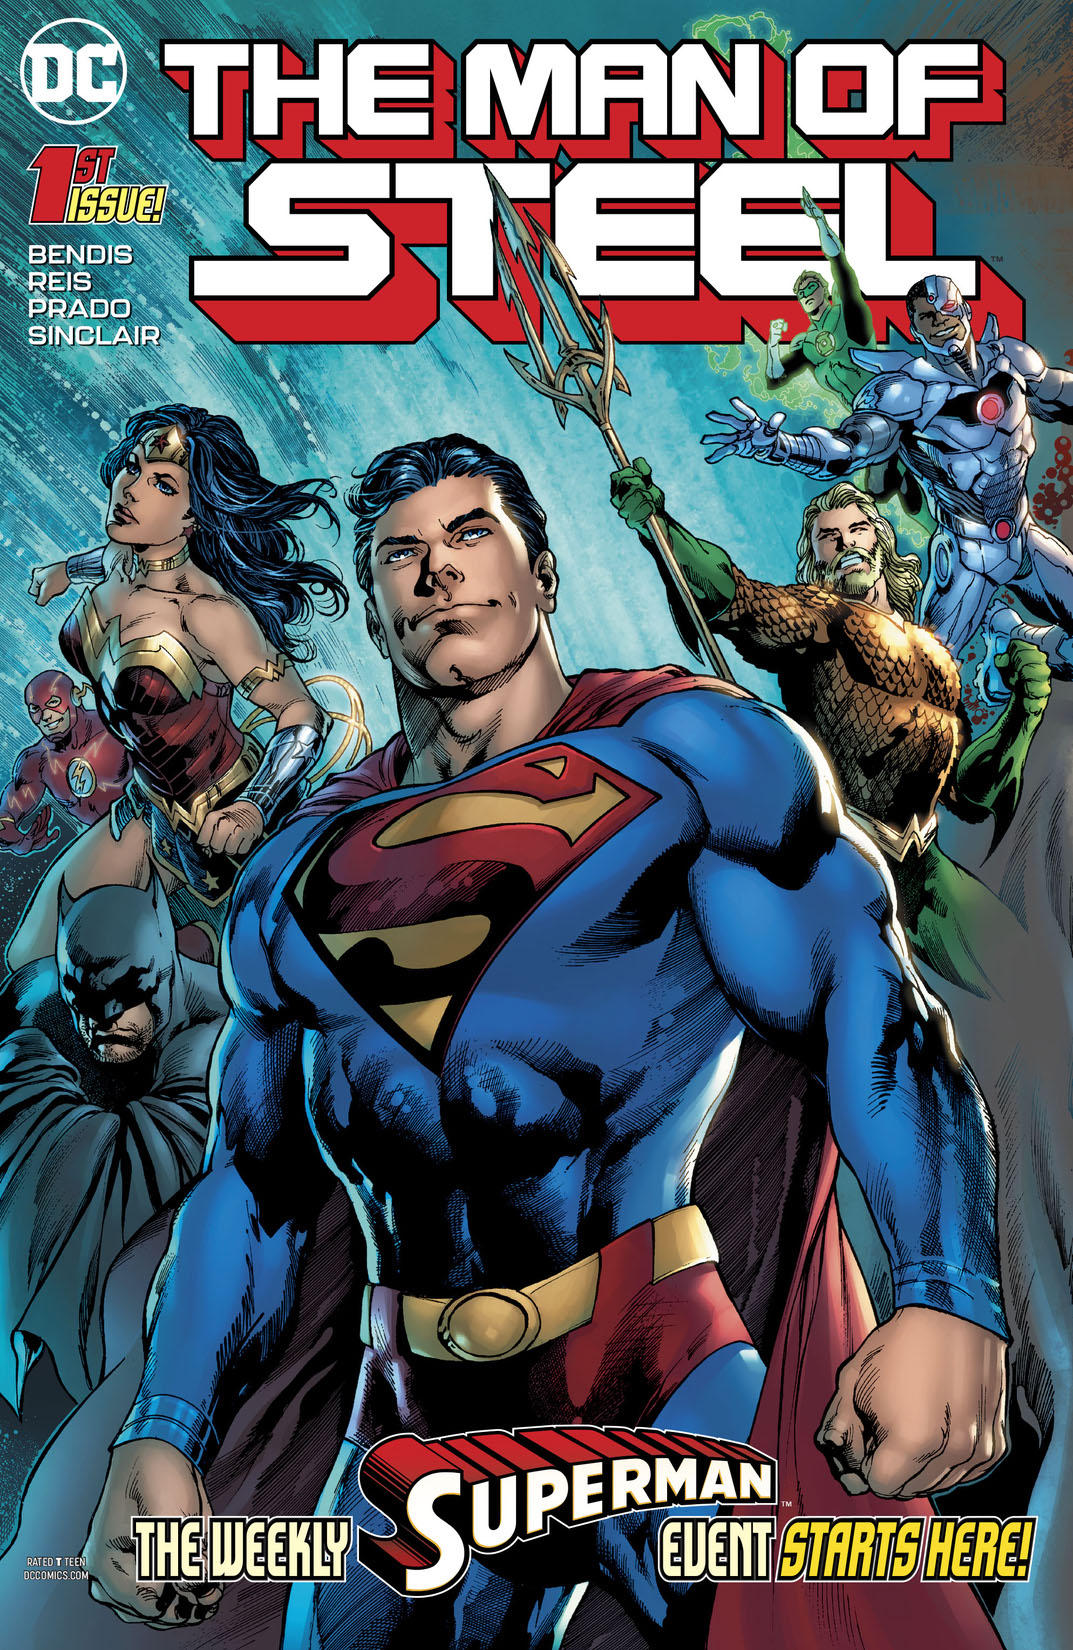 Man of Steel #1 preview images